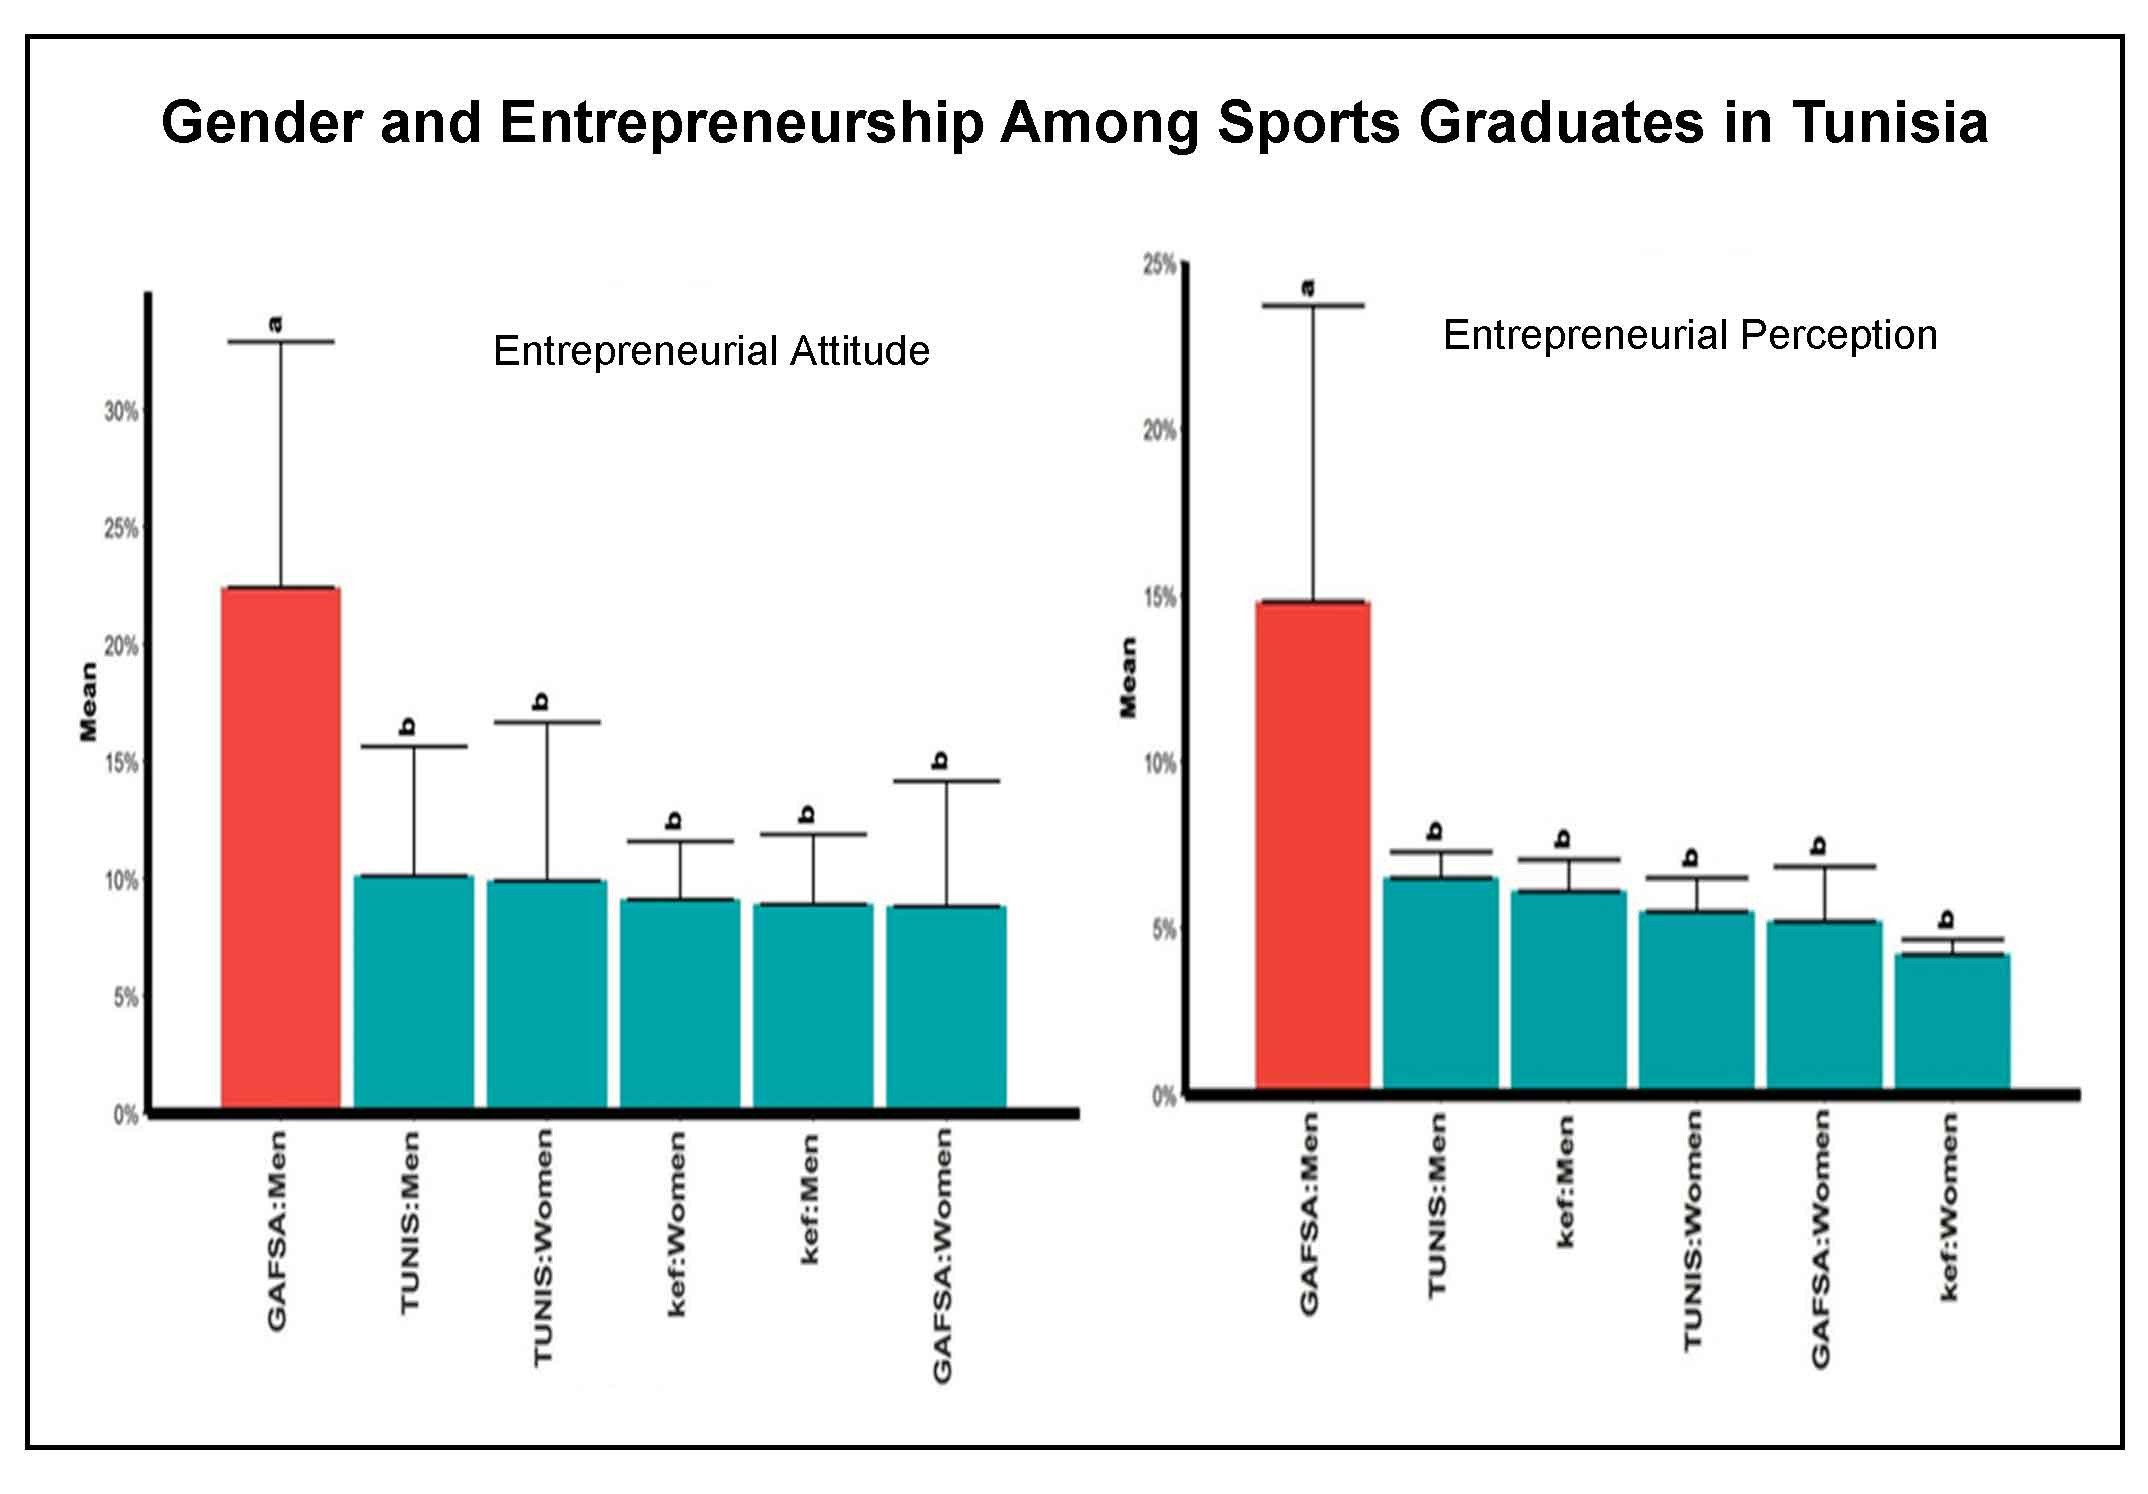 Gender, Territory and Entrepreneurship Among Unemployed Graduates in Physical Activities and Sports: The Case of Tunisia